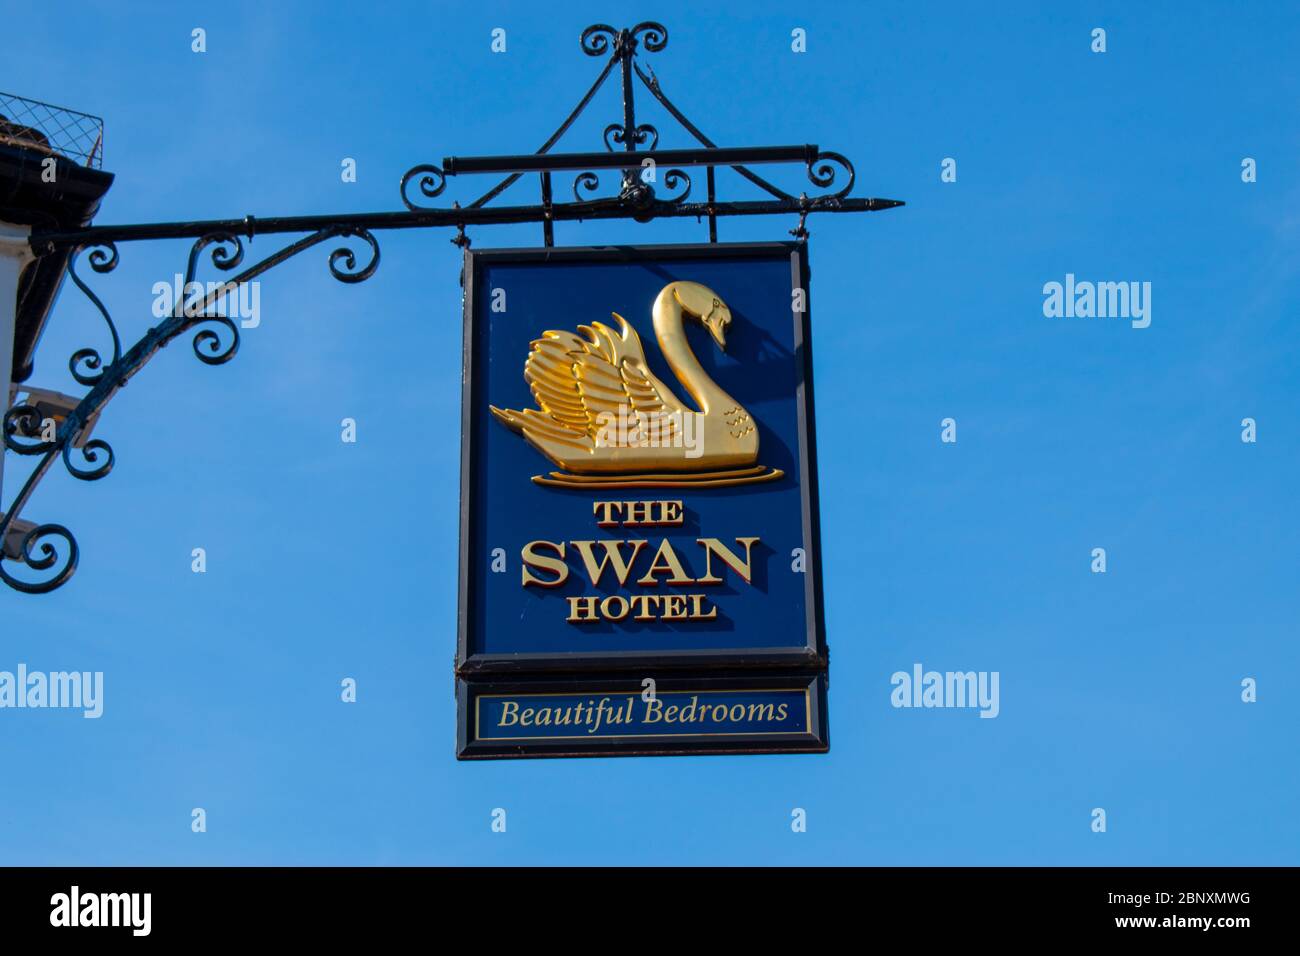 Arundel, West Sussex, UK, May 15, 2020, The Swan Hotel sign in the tourist town of Arundel near the banks of the River Arun. Stock Photo